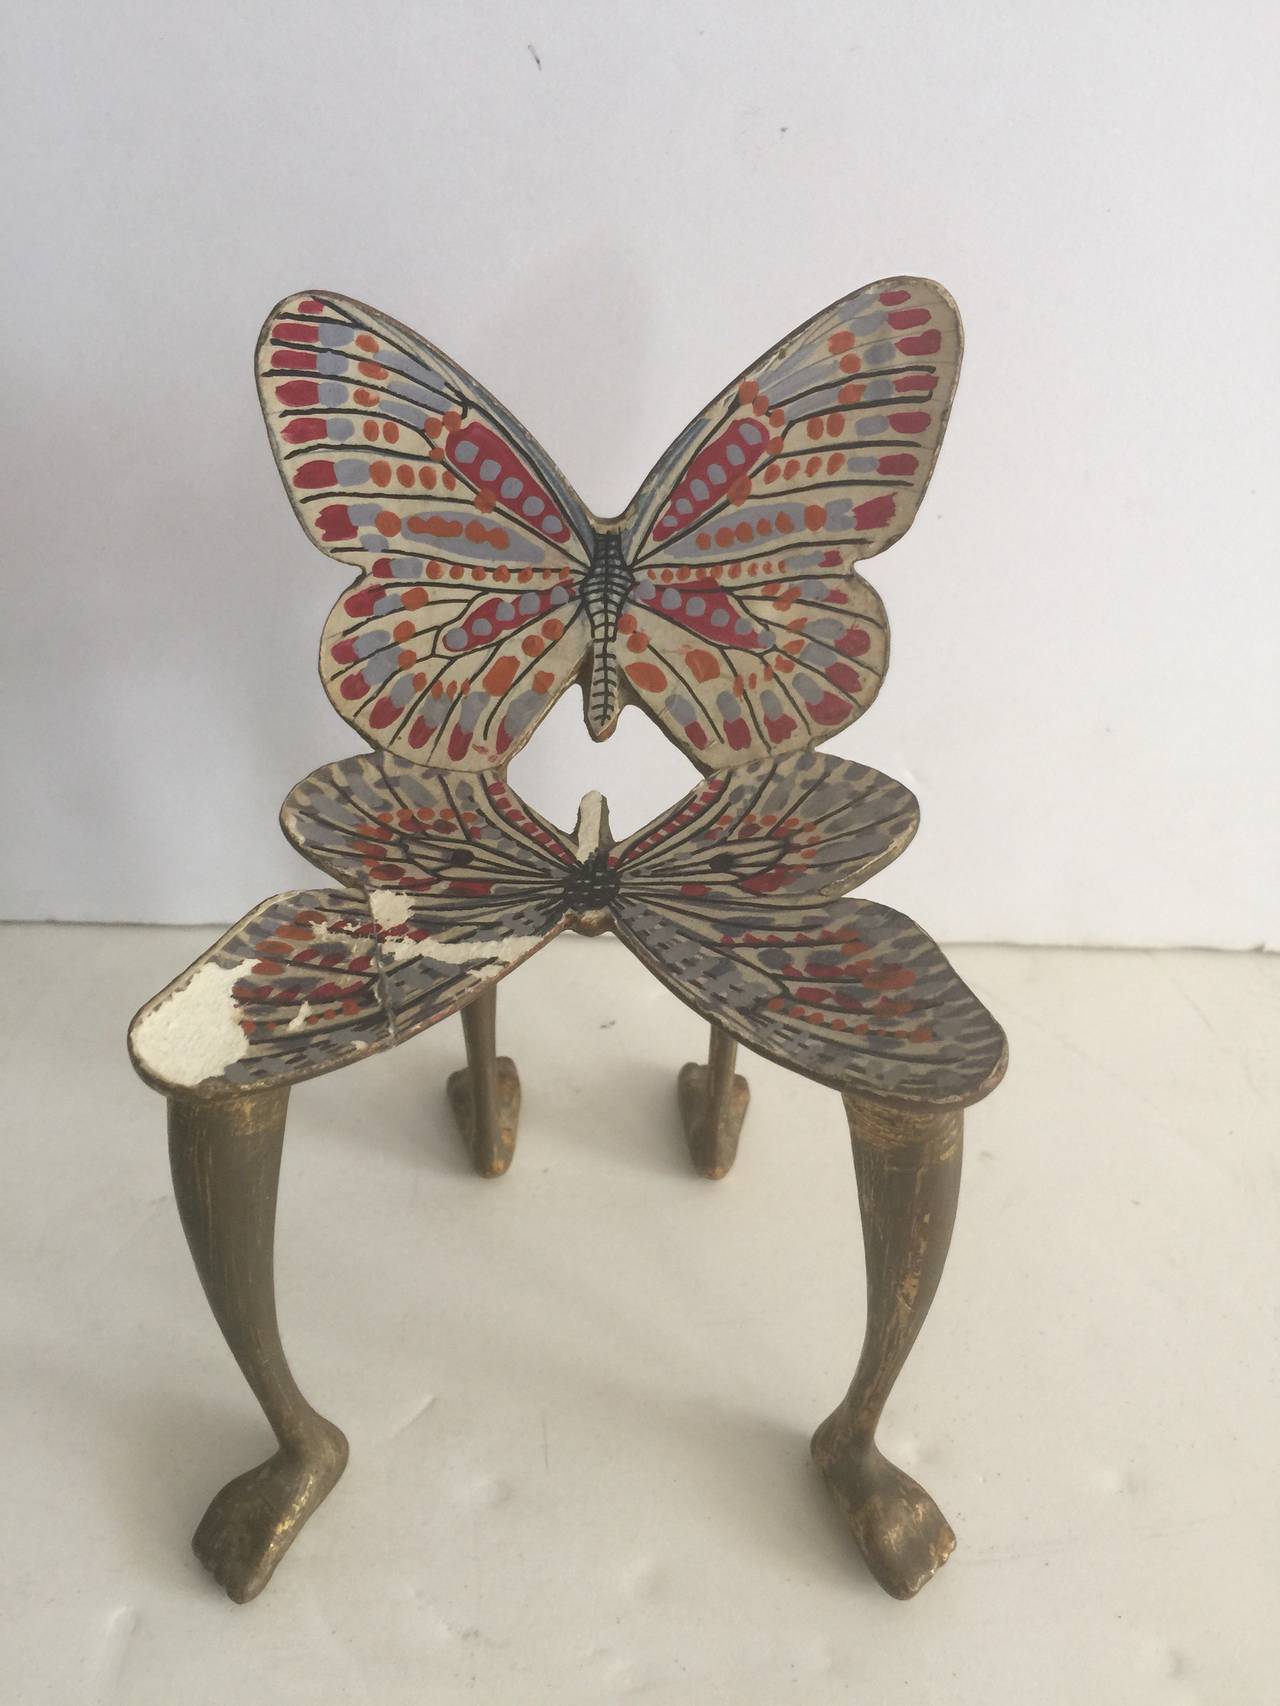 A Pedro Friedeberg Butterfly Chair Sculpture circa 1970ties.
This chair is handpainted and polychromed wood
Chair is hand signed in the rear wing .